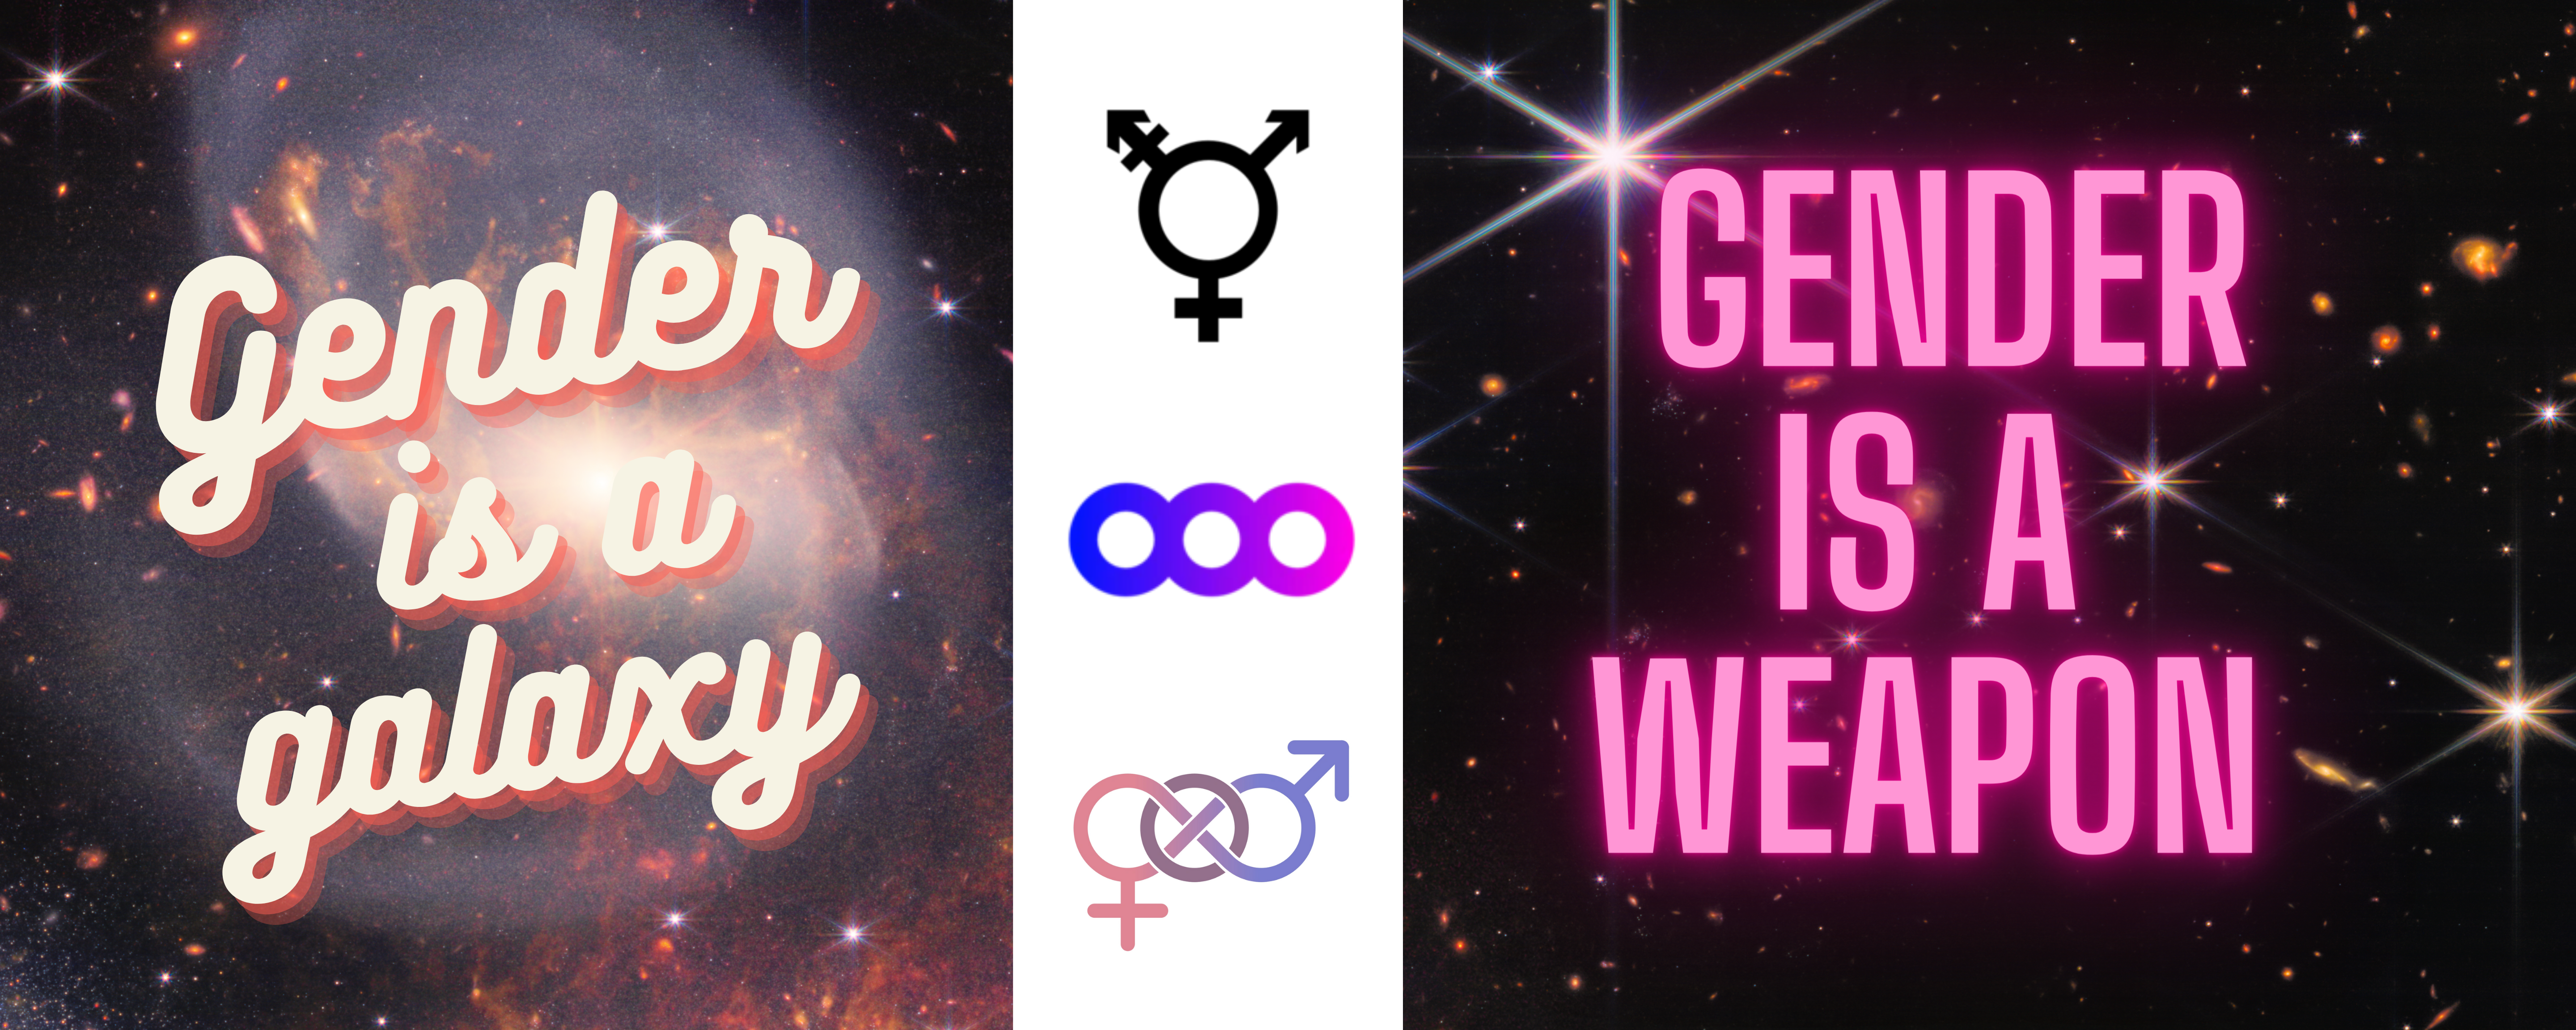 Gender is a Galaxy, Gender is a Weapon